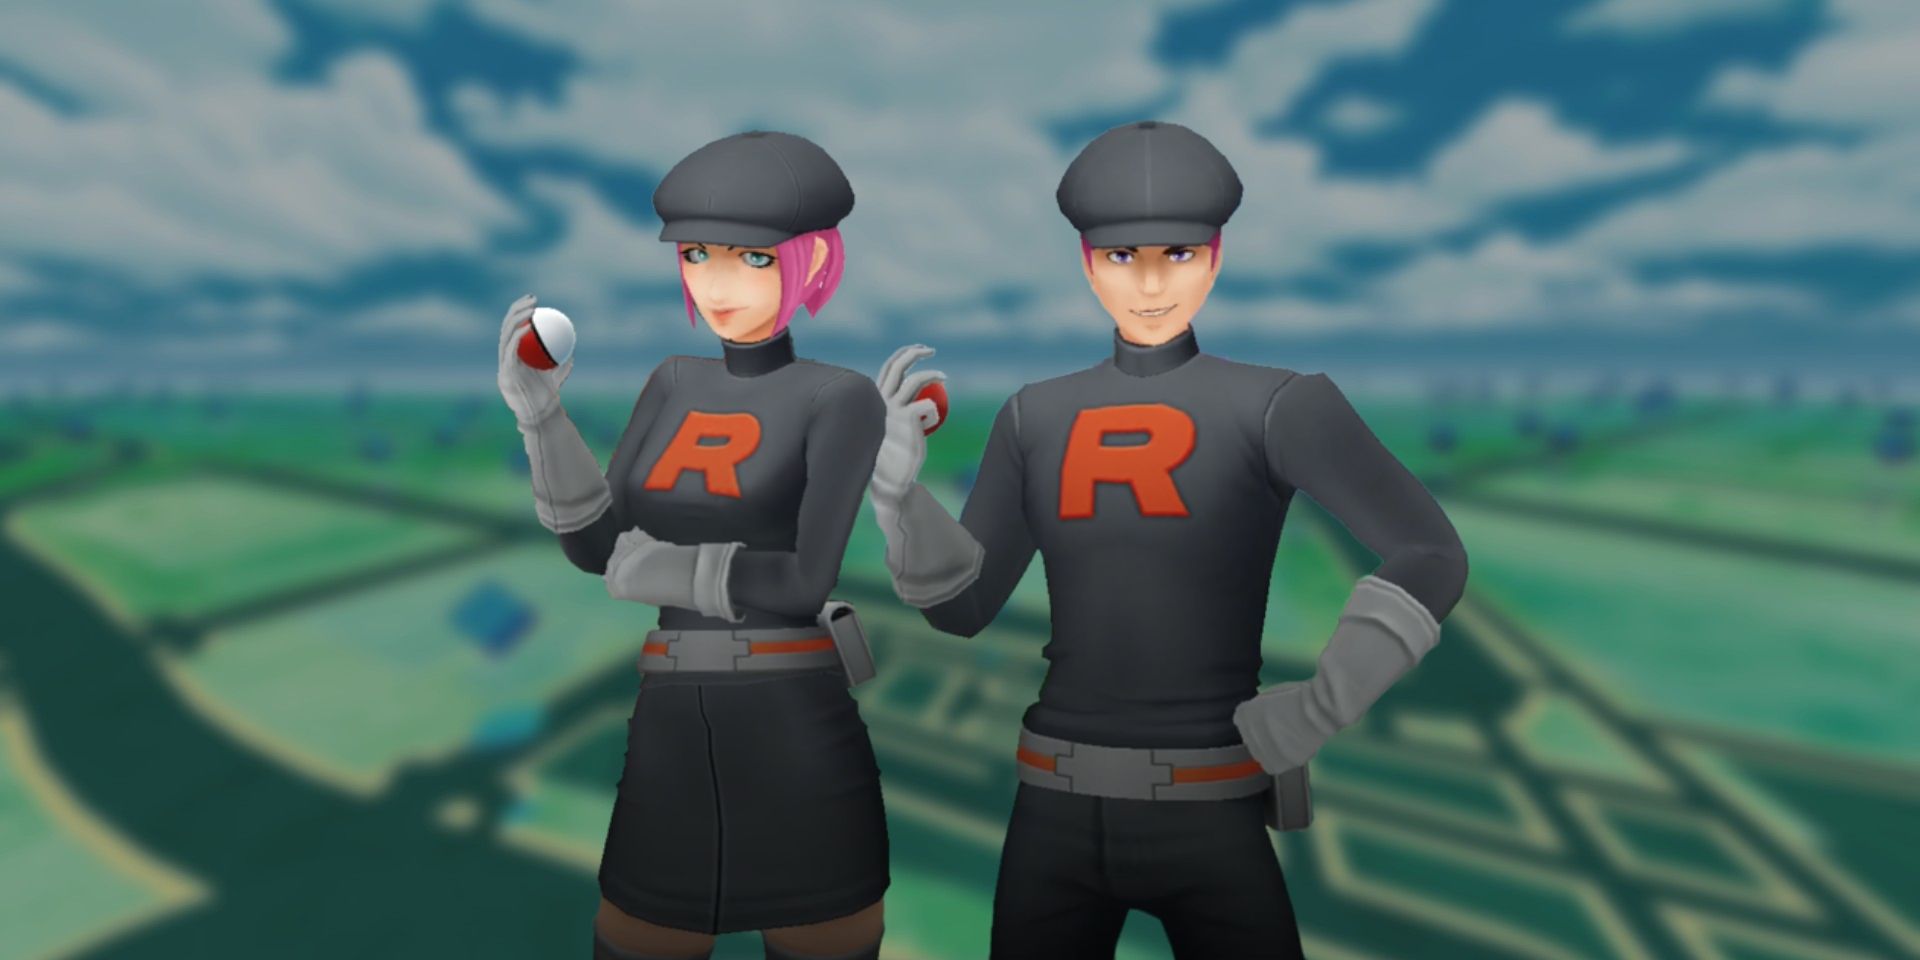 Pokemon GO's Team GO Rocket Grunts with a blurred-out image of GO's map in the background.